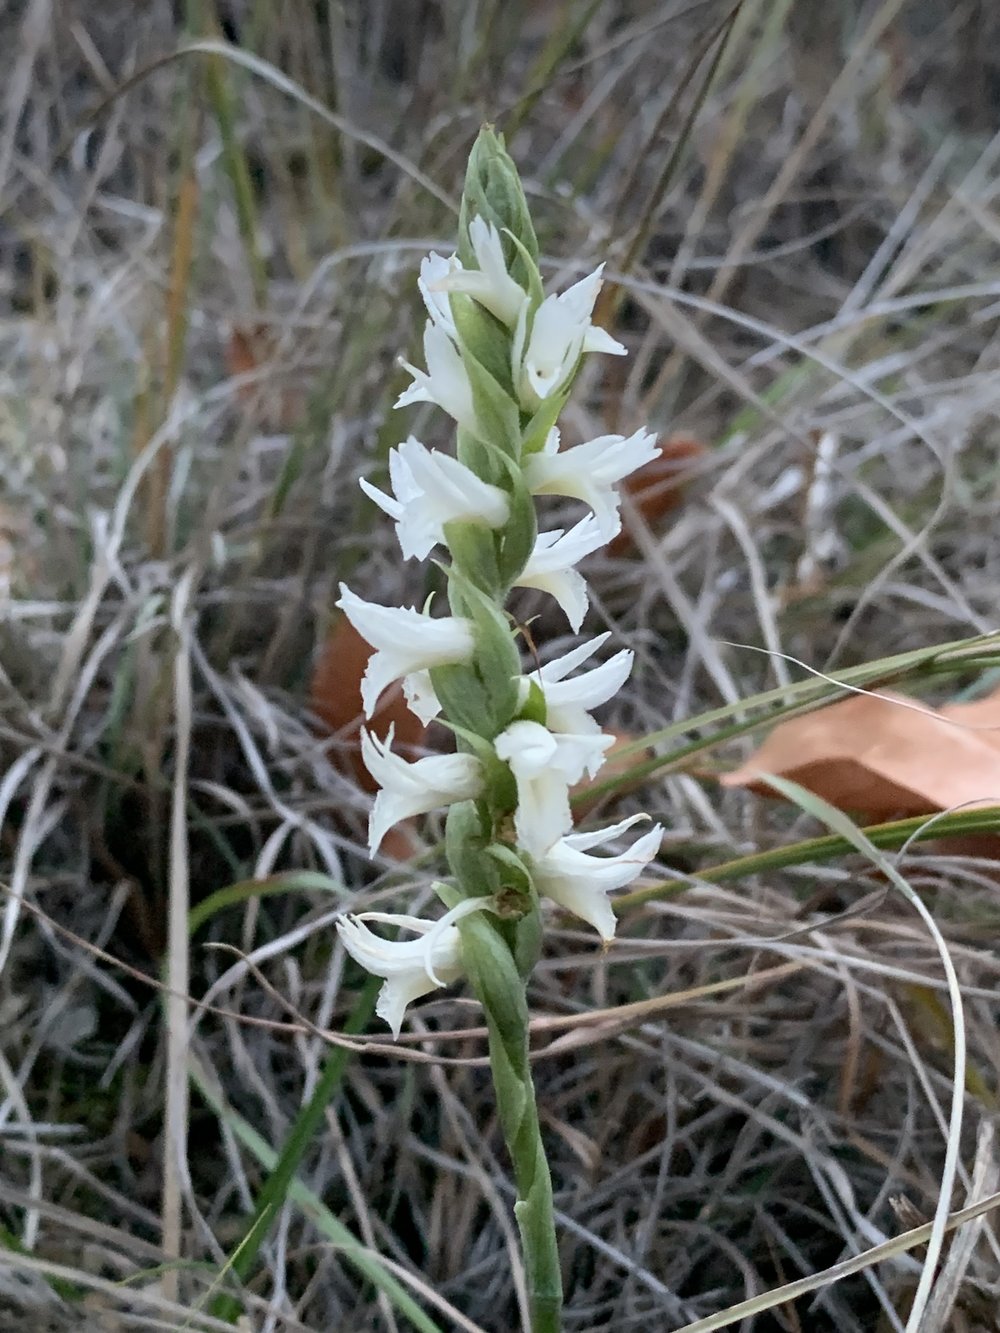   Great Plains Ladies Tresses Orchid  ( Spiranthes magnicamporum ) smell as sweet as they look. 